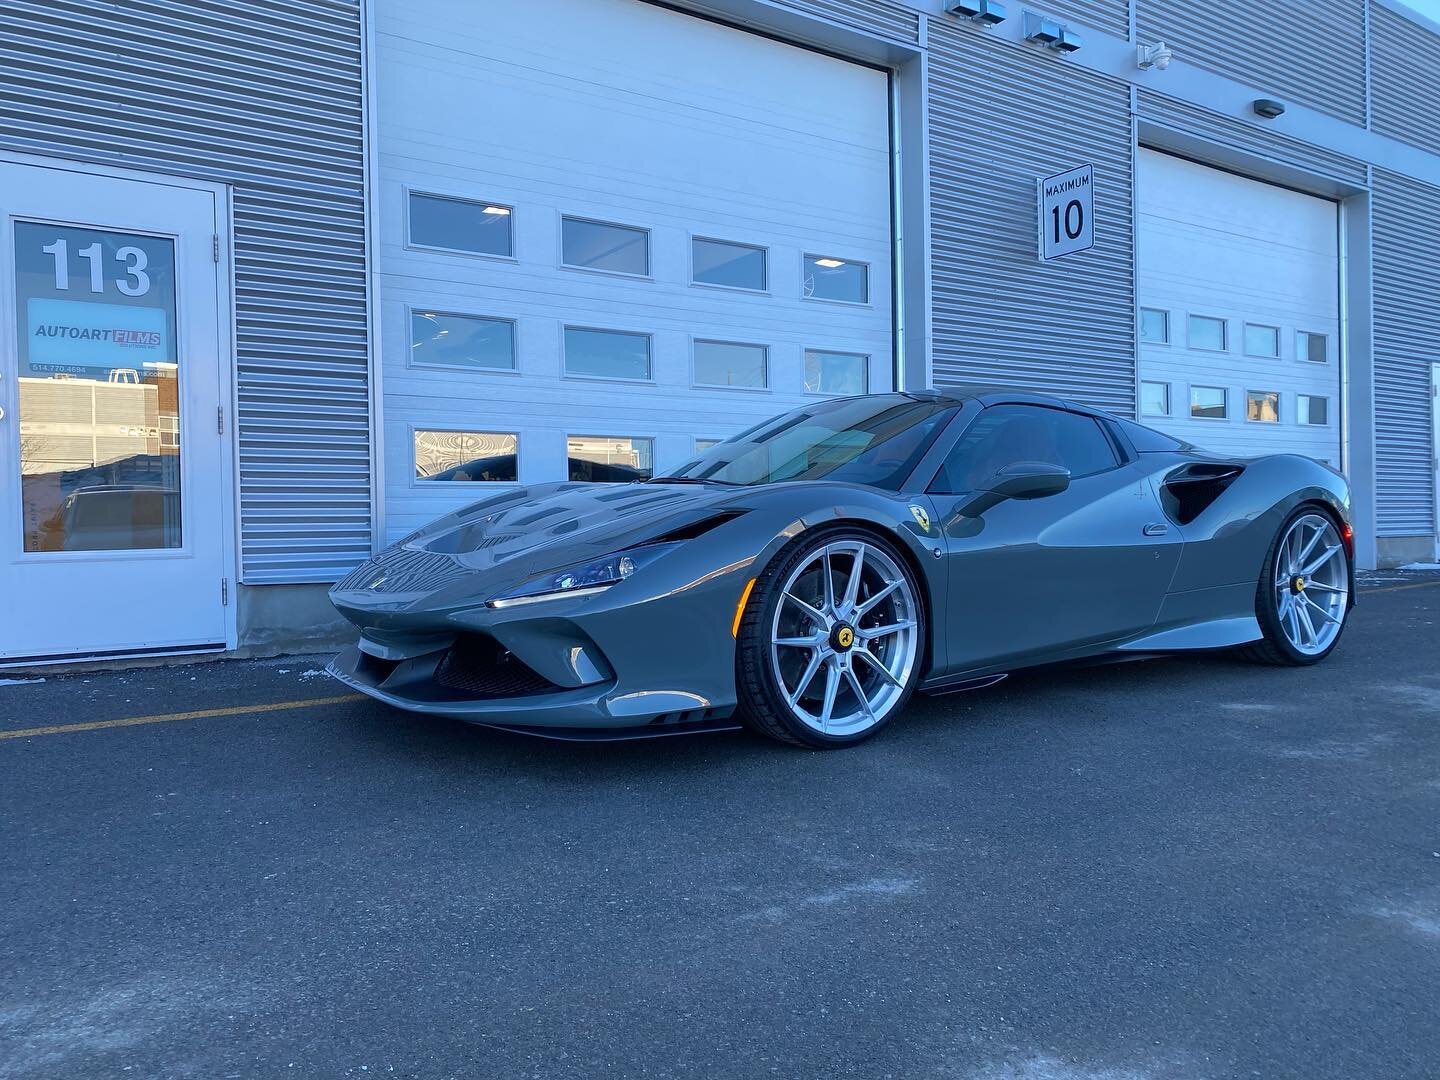 Protecting every curve and contour of this stunning Ferrari F8 Spyder with our top-of-the-line paint protection film. It's like a shield for your prized possession. #Ferrari #F8Spyder #PaintProtection #CarsofInstagram #AutoDetailing #CarsWithoutLimit